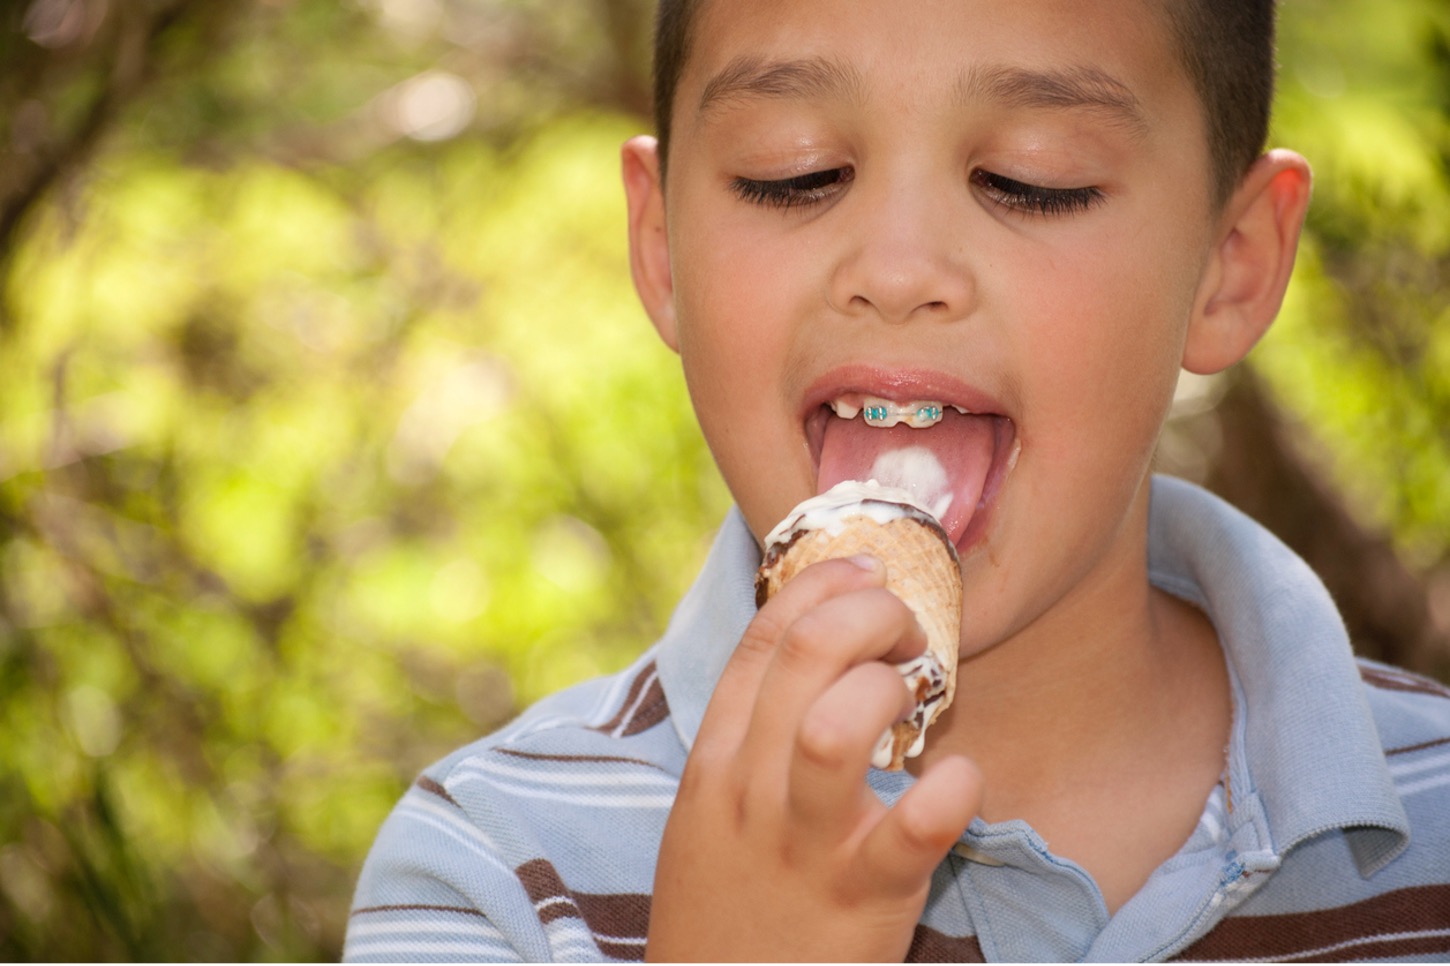 A young person with braces eating an ice cream cone